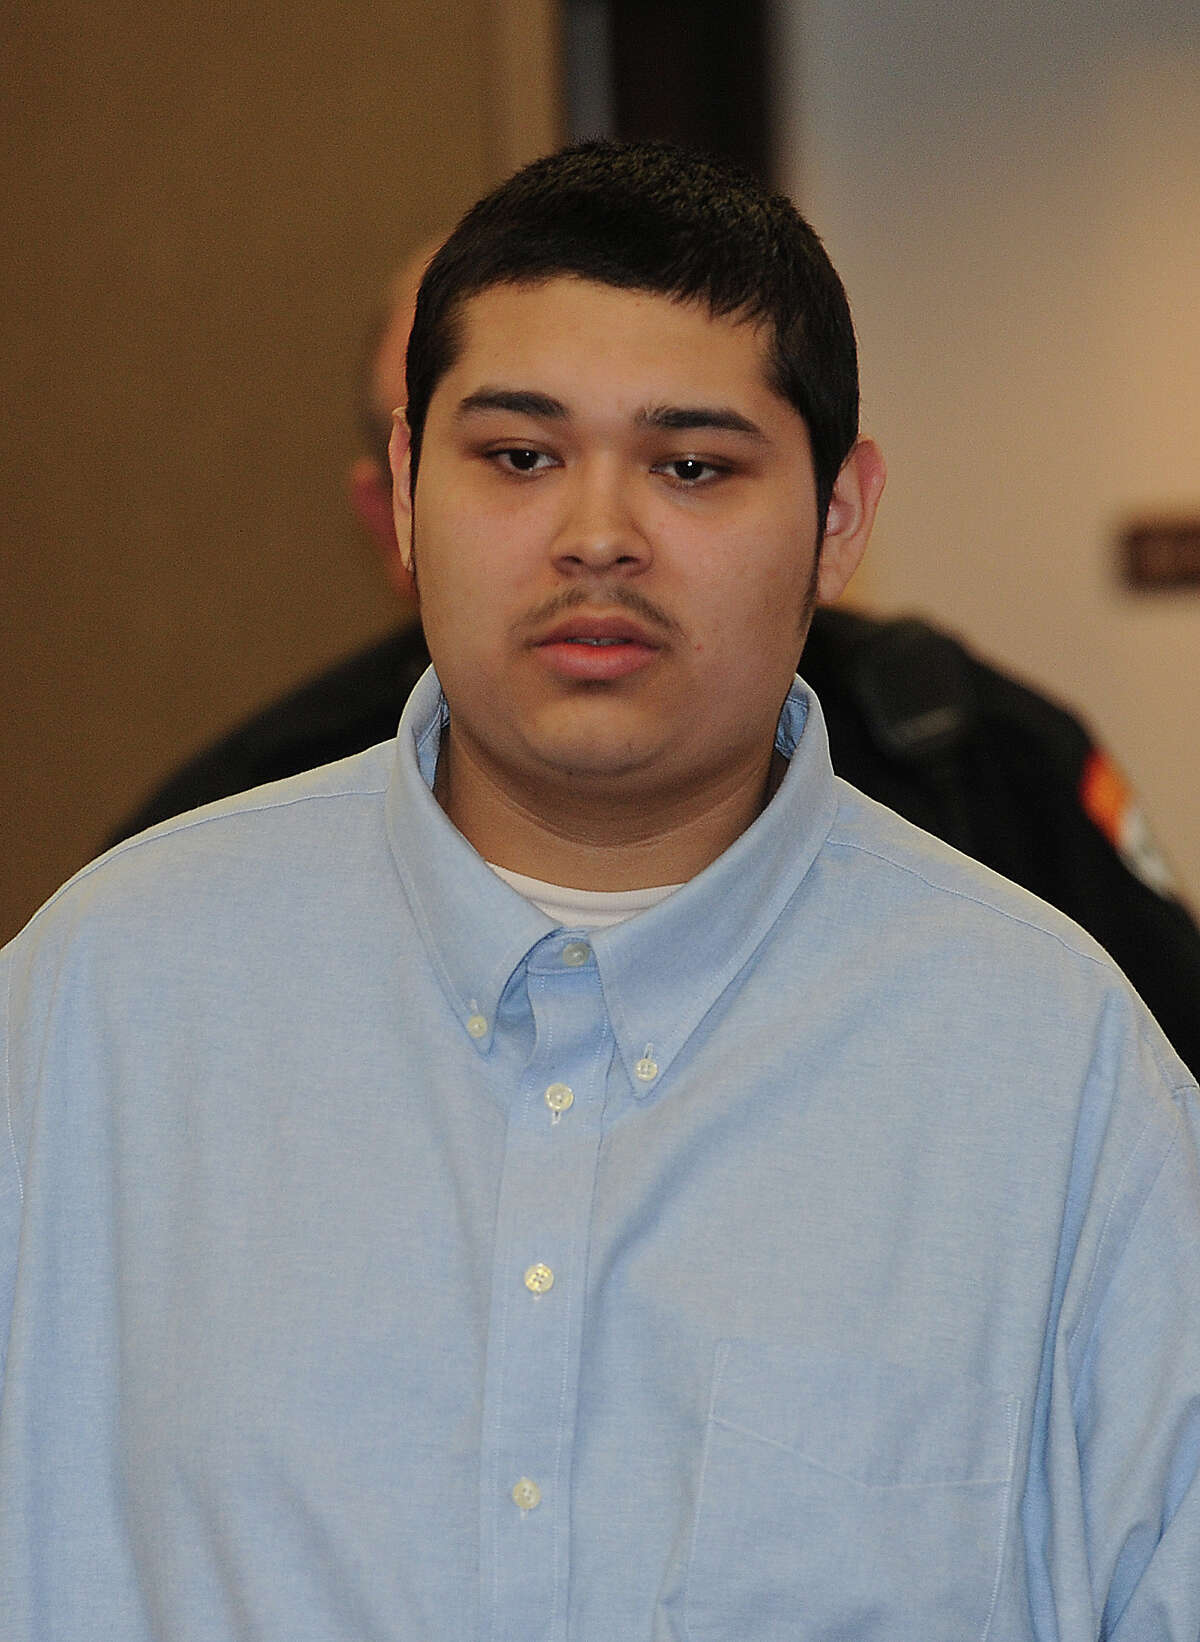 Jonathan Benitez enters Judge John Steven's courtroom on Tuesday to begin his manslaughter trial for the death of a 16-year-old girl in 2011. Photo taken Tuesday, January 24, 2012 Guiseppe Barranco/The Enterprise